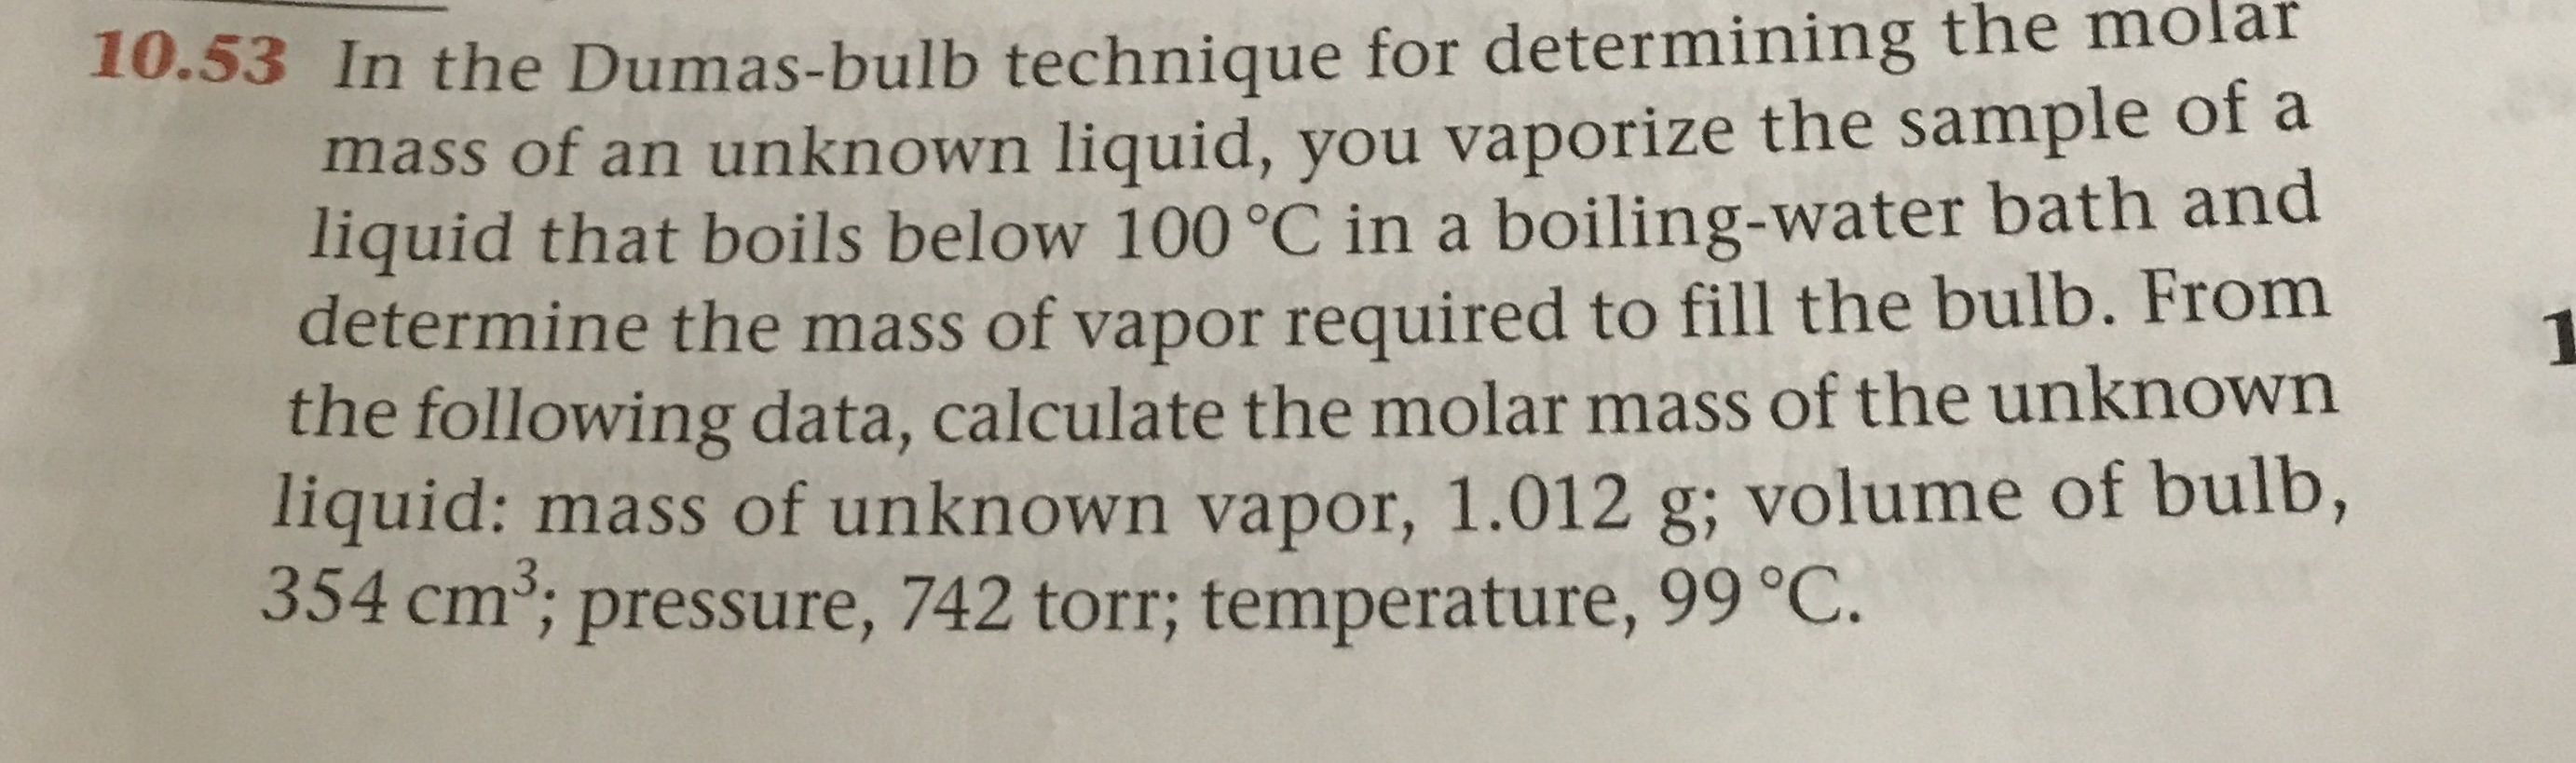 .53 In the Dumas-bulb technique for determining the molar
mass of an unknown liquid, you vaporize the sample of a
liquid that boils below 100 °C in a boiling-water bath and
determine the mass of vapor required to fill the bulb. From
the following data, calculate the molar mass of the unknown
liquid: mass of unknown vapor, 1.012 g; volume of bulb,
354 cm; pressure, 742 torr; temperature, 99 °C.
3.
